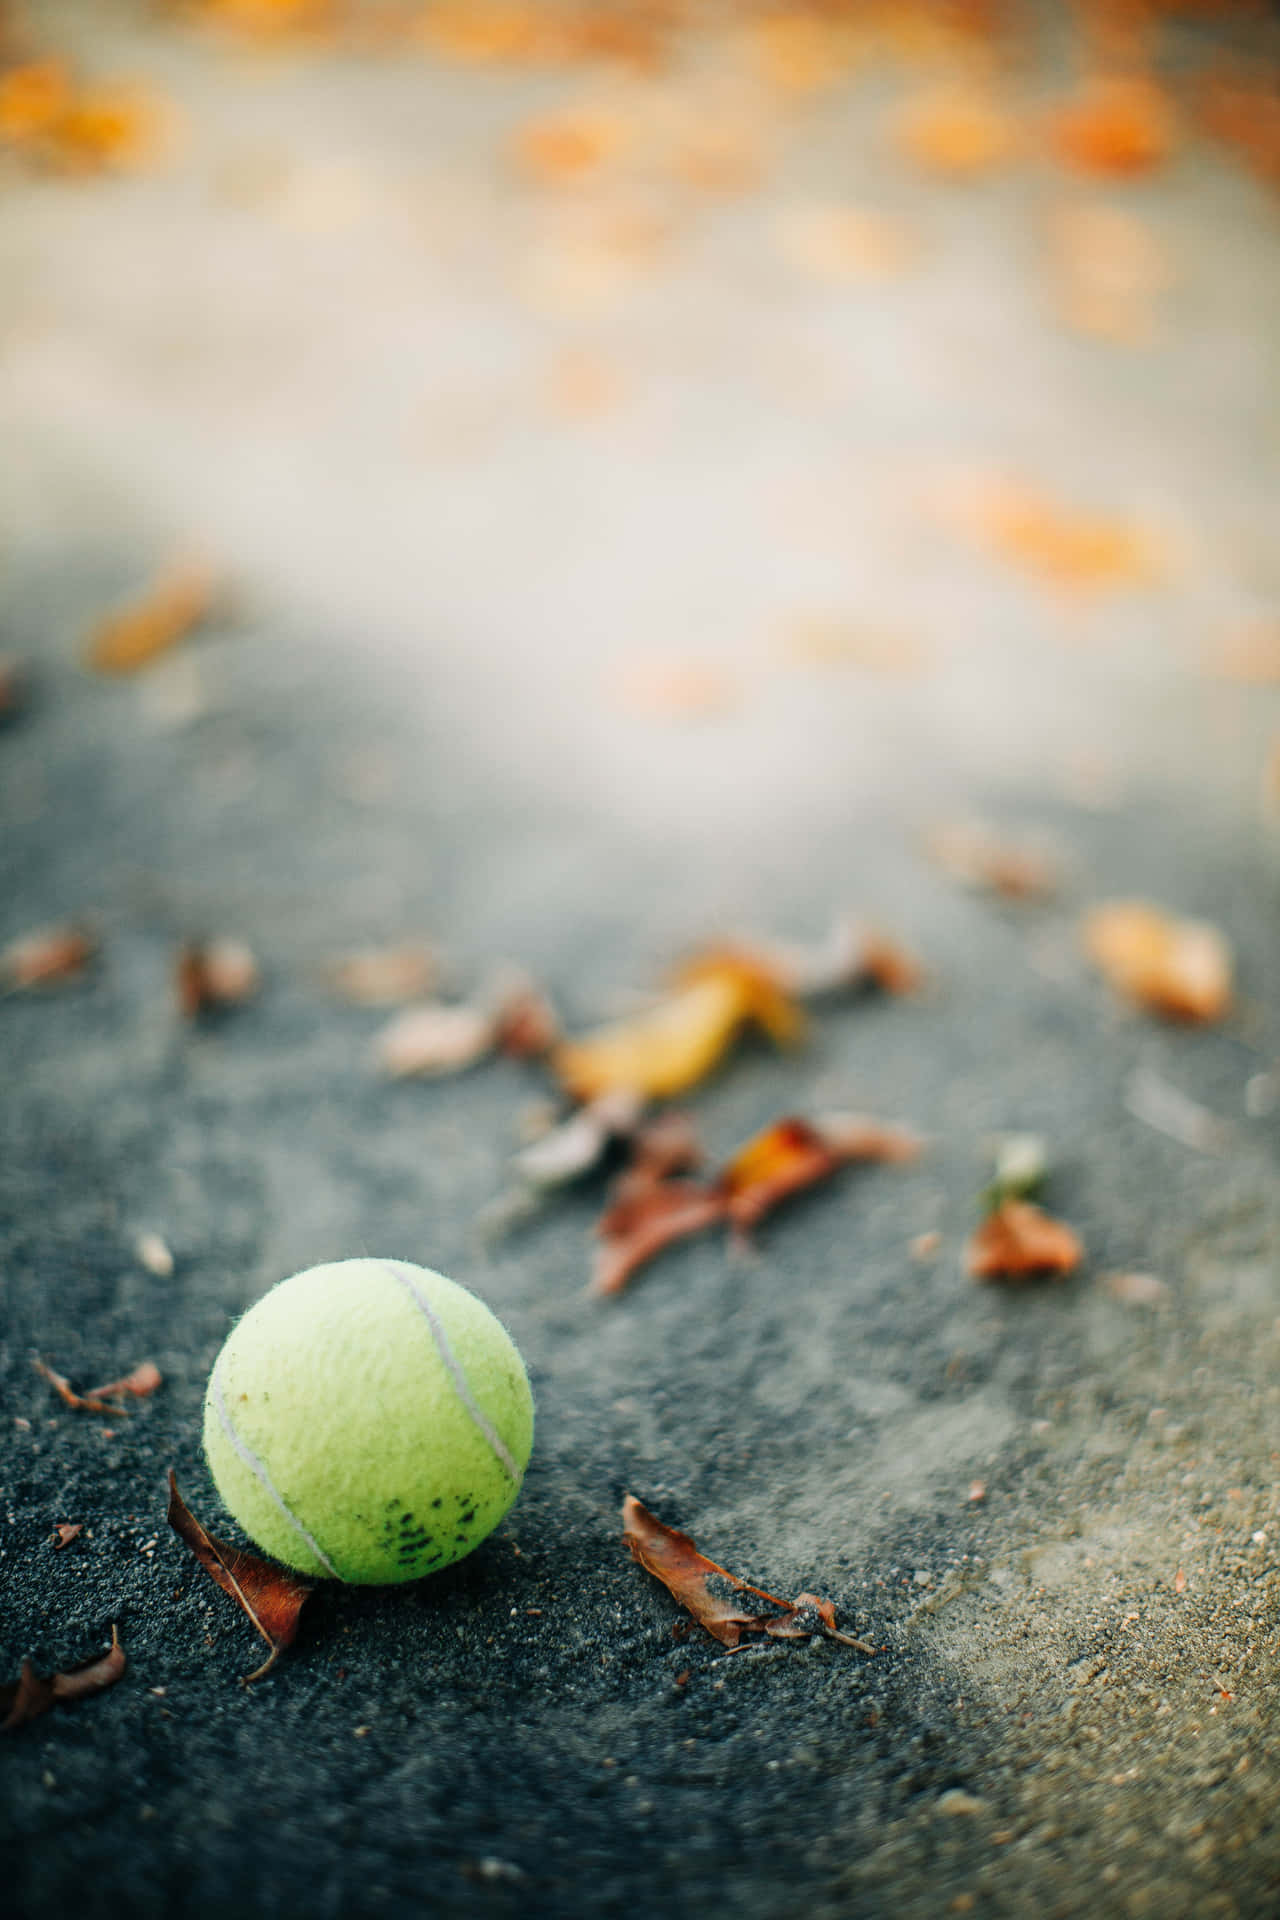 A yellow tennis ball ready for a game of tennis. Wallpaper